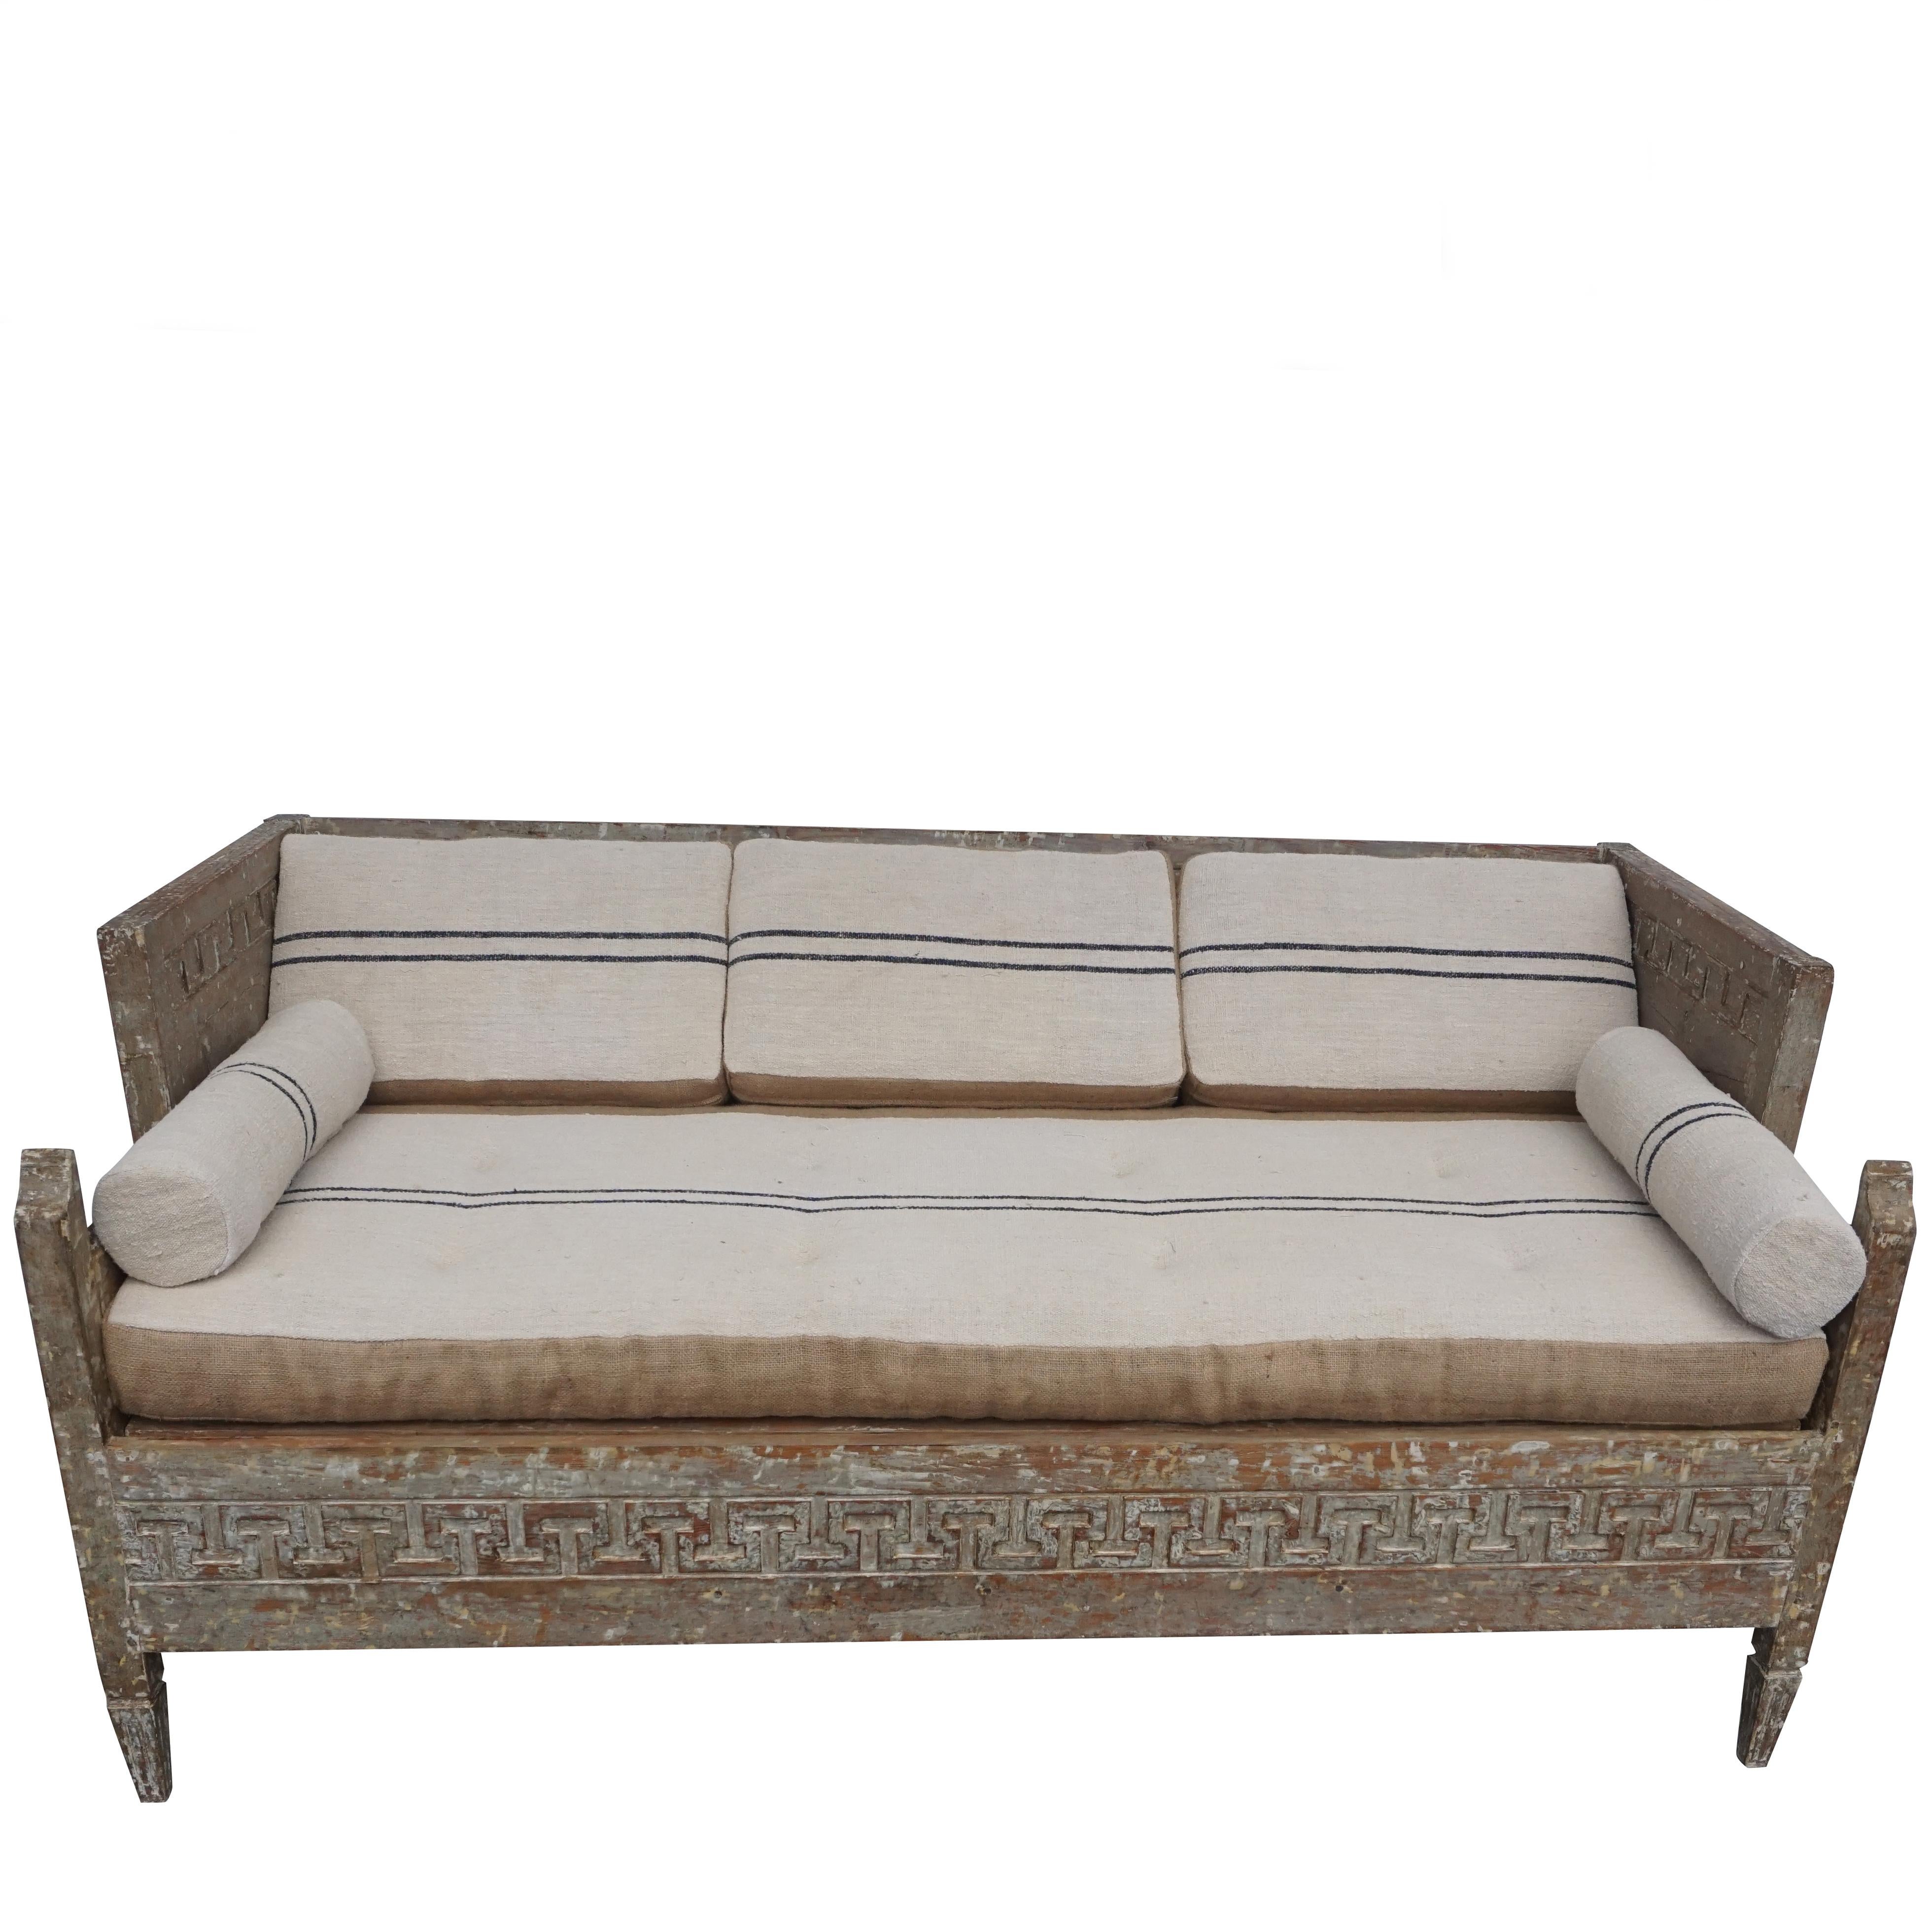 An antique Lit Du Jour, Swedish Gustavian daybed made of hand carved pinewood and fabric. This charming wood sofa was scraped to its original finish. Hand carved Greek key ornaments with an expandable storage space below sitting area, in good